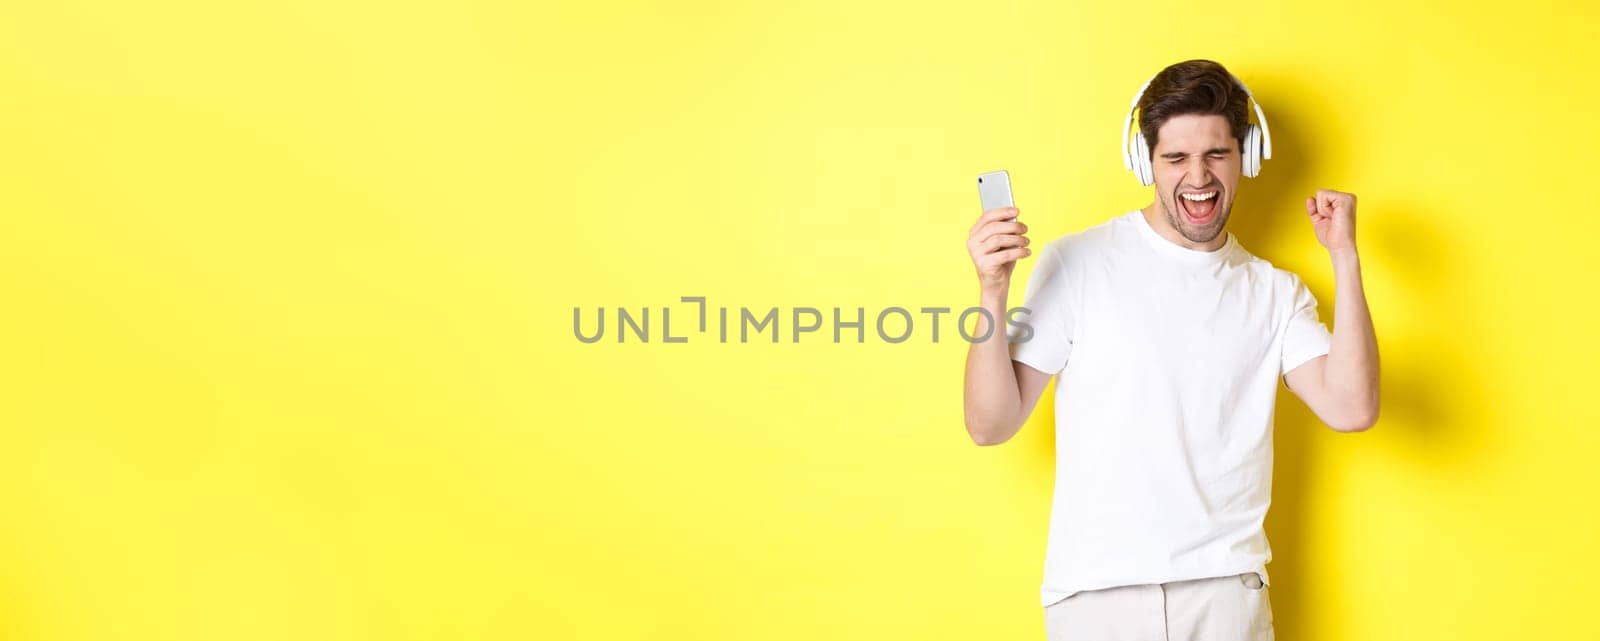 Happy man dancing and listening music in headphones, holding mobile cell phone, standing against yellow background.